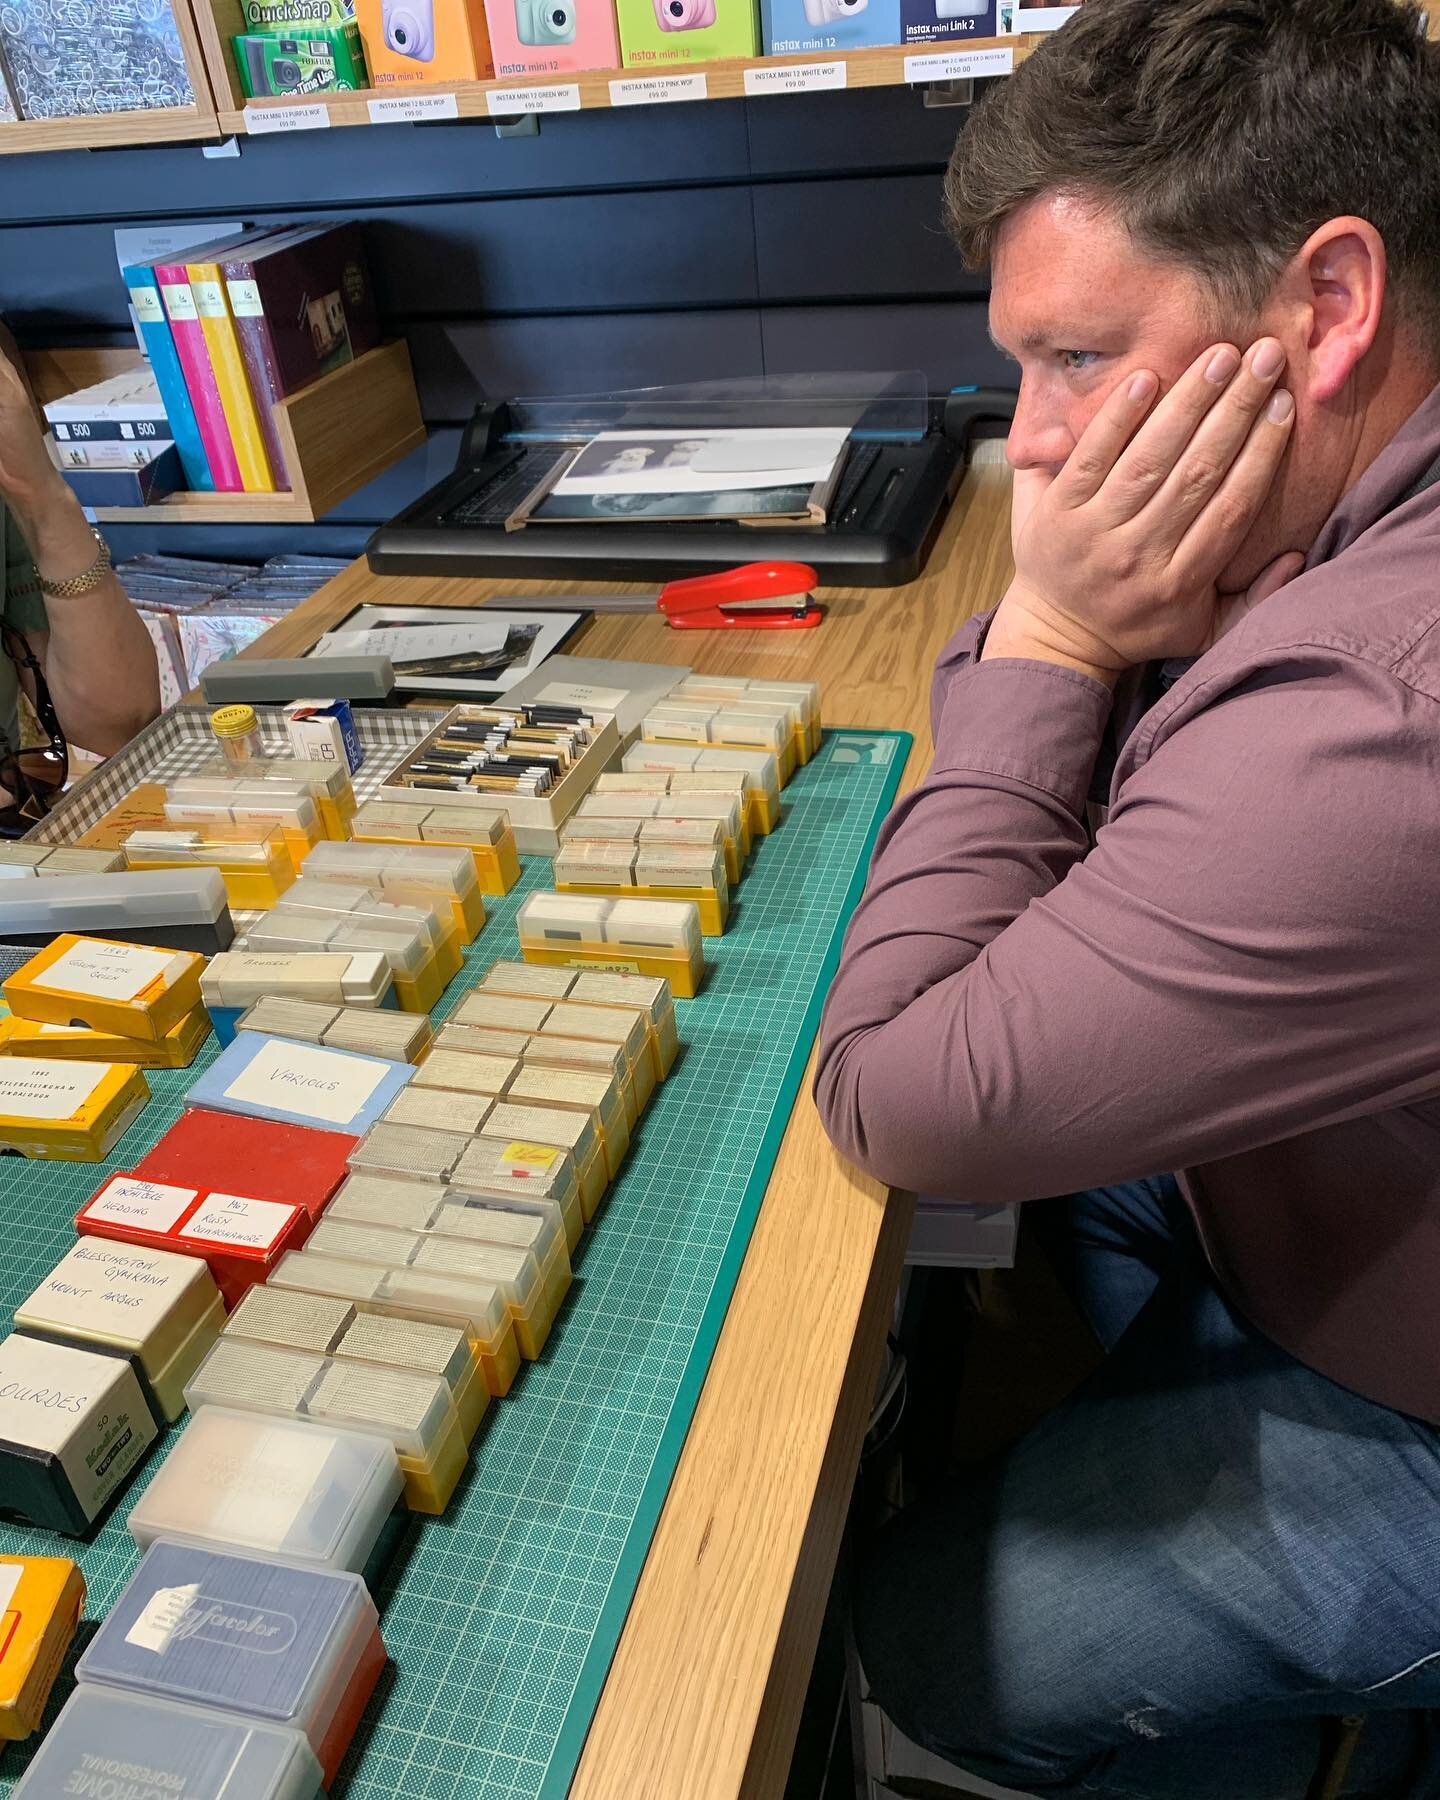 This is Gavin kissing his summer plans goodbye.

A lifetime of slides to be scanned and printed. Come see what we can do with you &ldquo;shoe box from under the stairs&rdquo;.

#wonderphotoclontarf